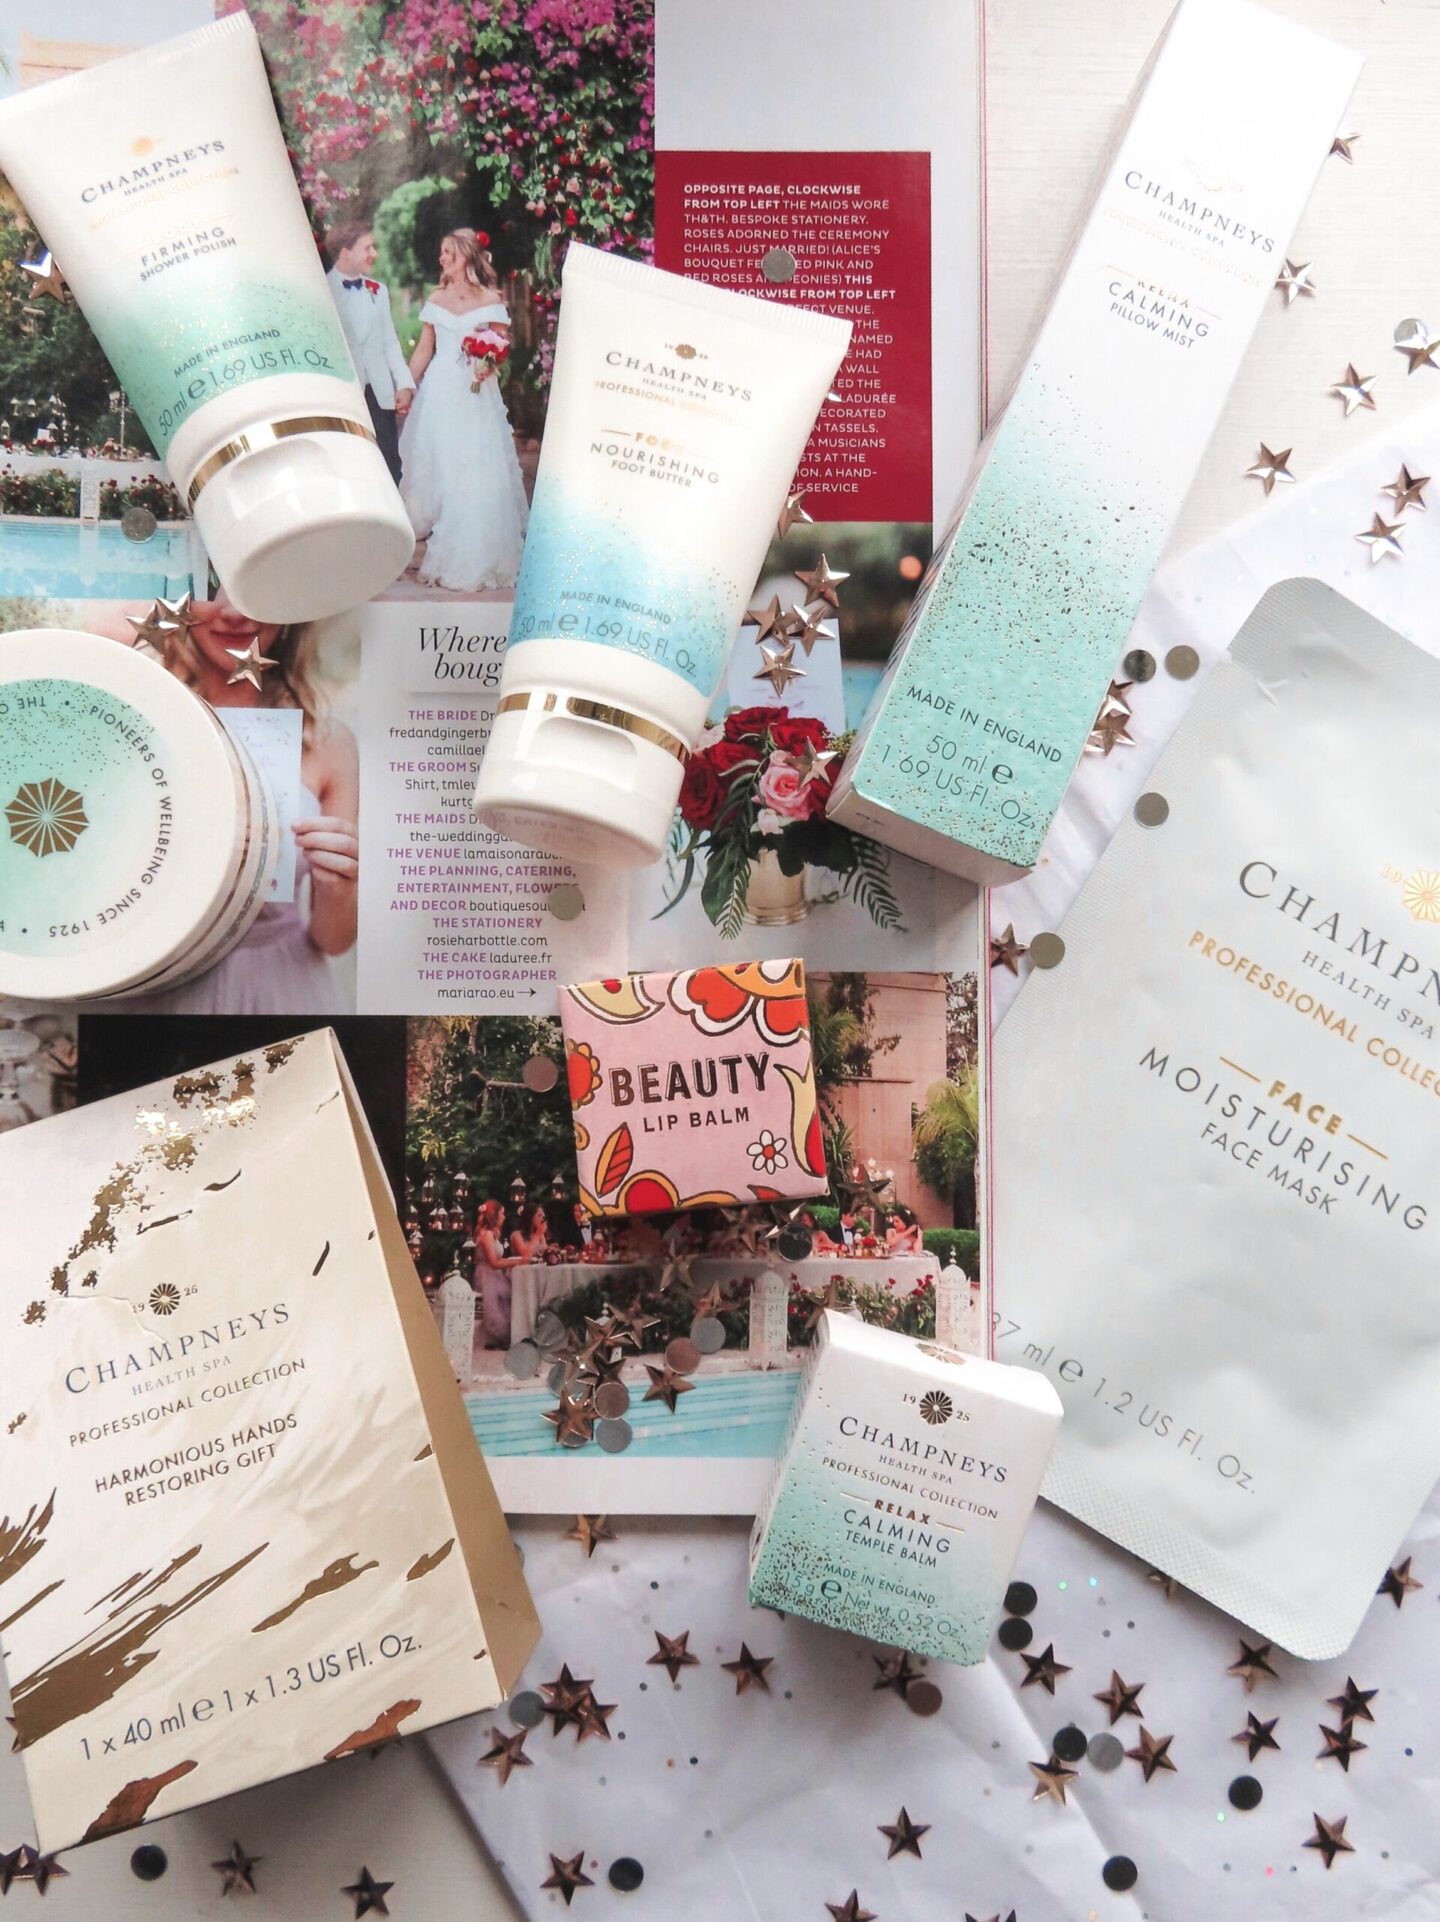 Champneys gifts